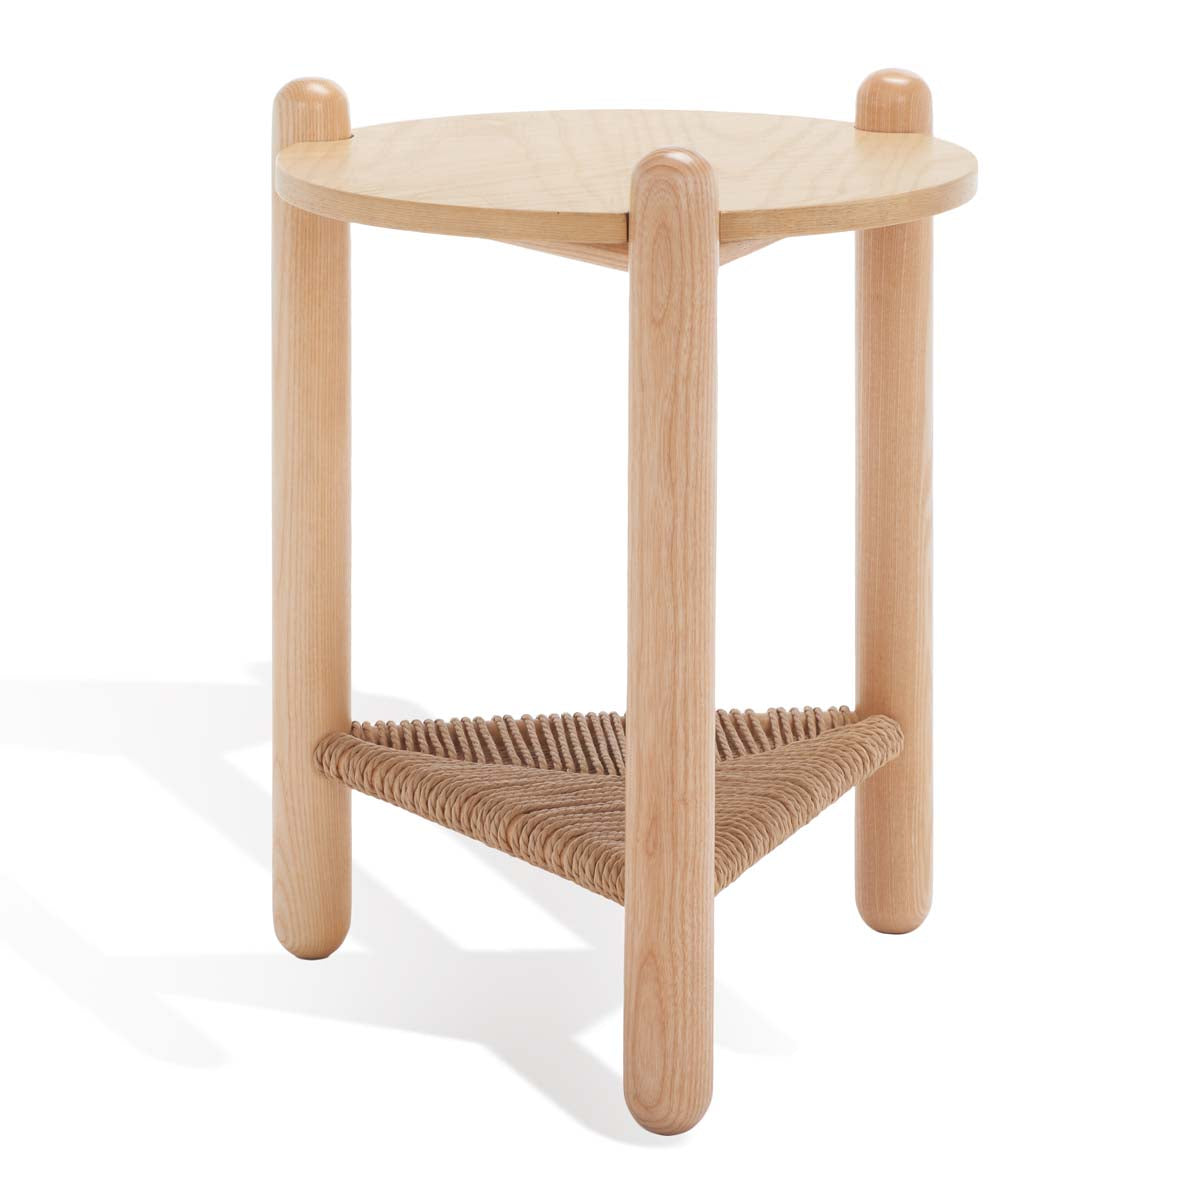 Safavieh Couture Macianna Woven Shelf Accent Table - Natural